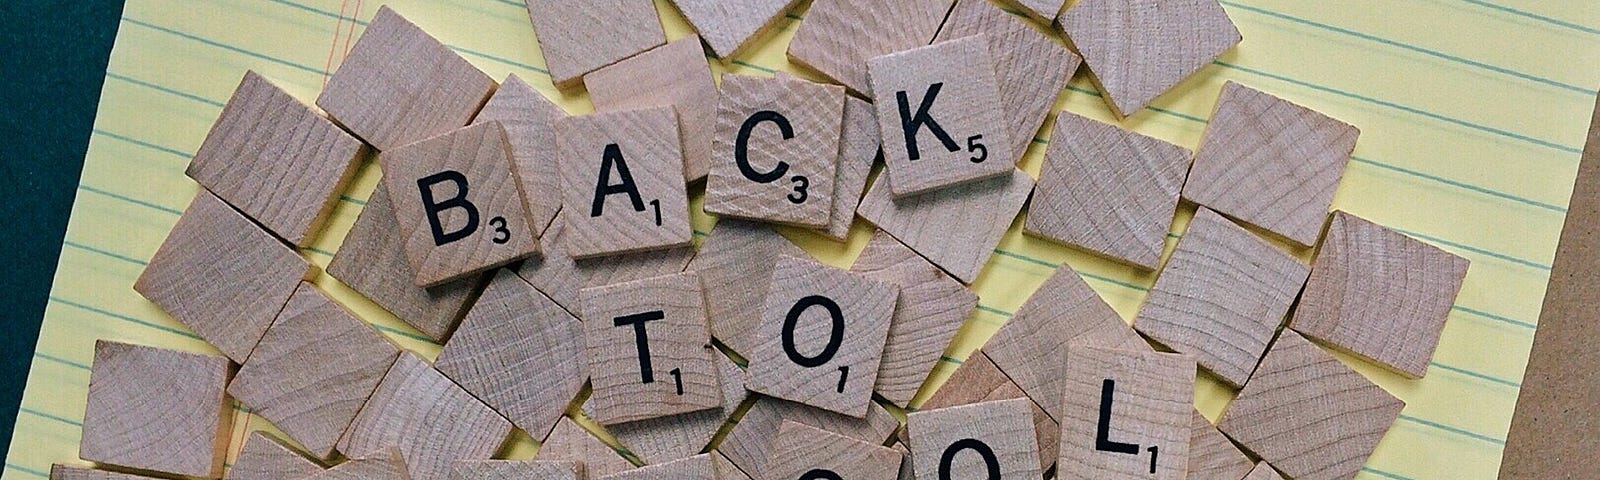 Scrabble letters spelling out “back to school”.